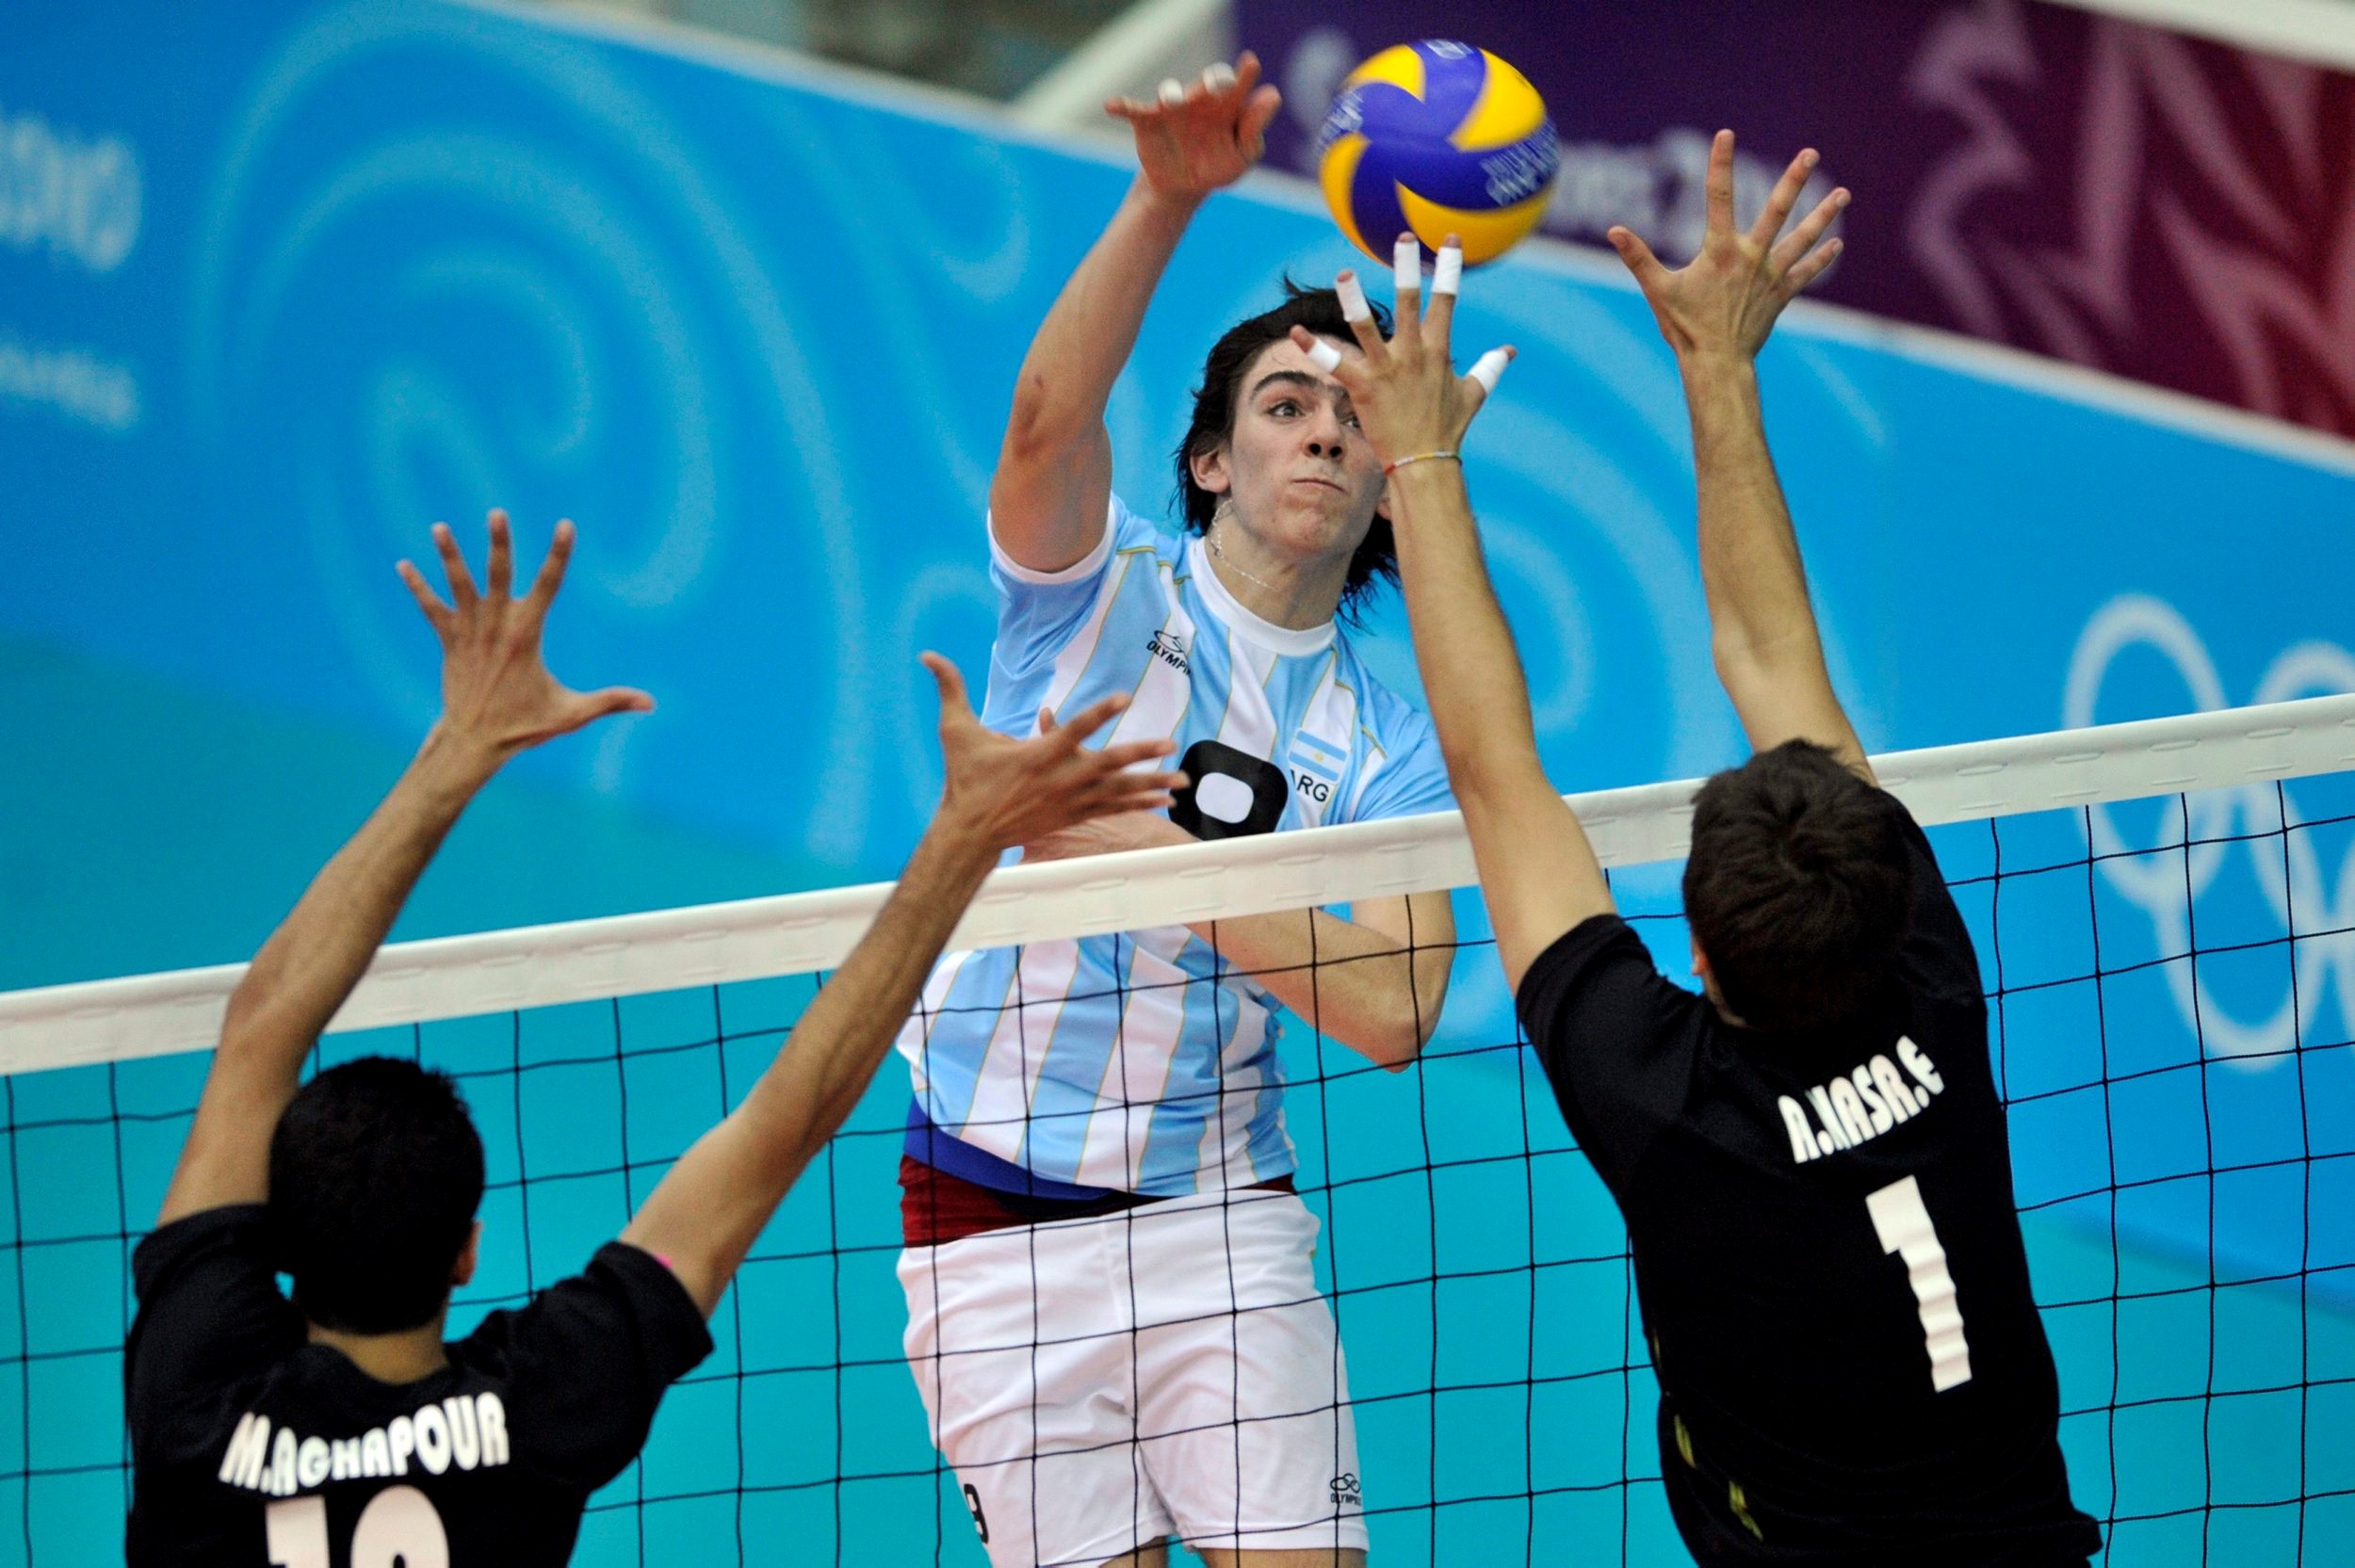 Man Volleyball Match In Olympics Wallpapers - Volleyball Smash Image Hd , HD Wallpaper & Backgrounds